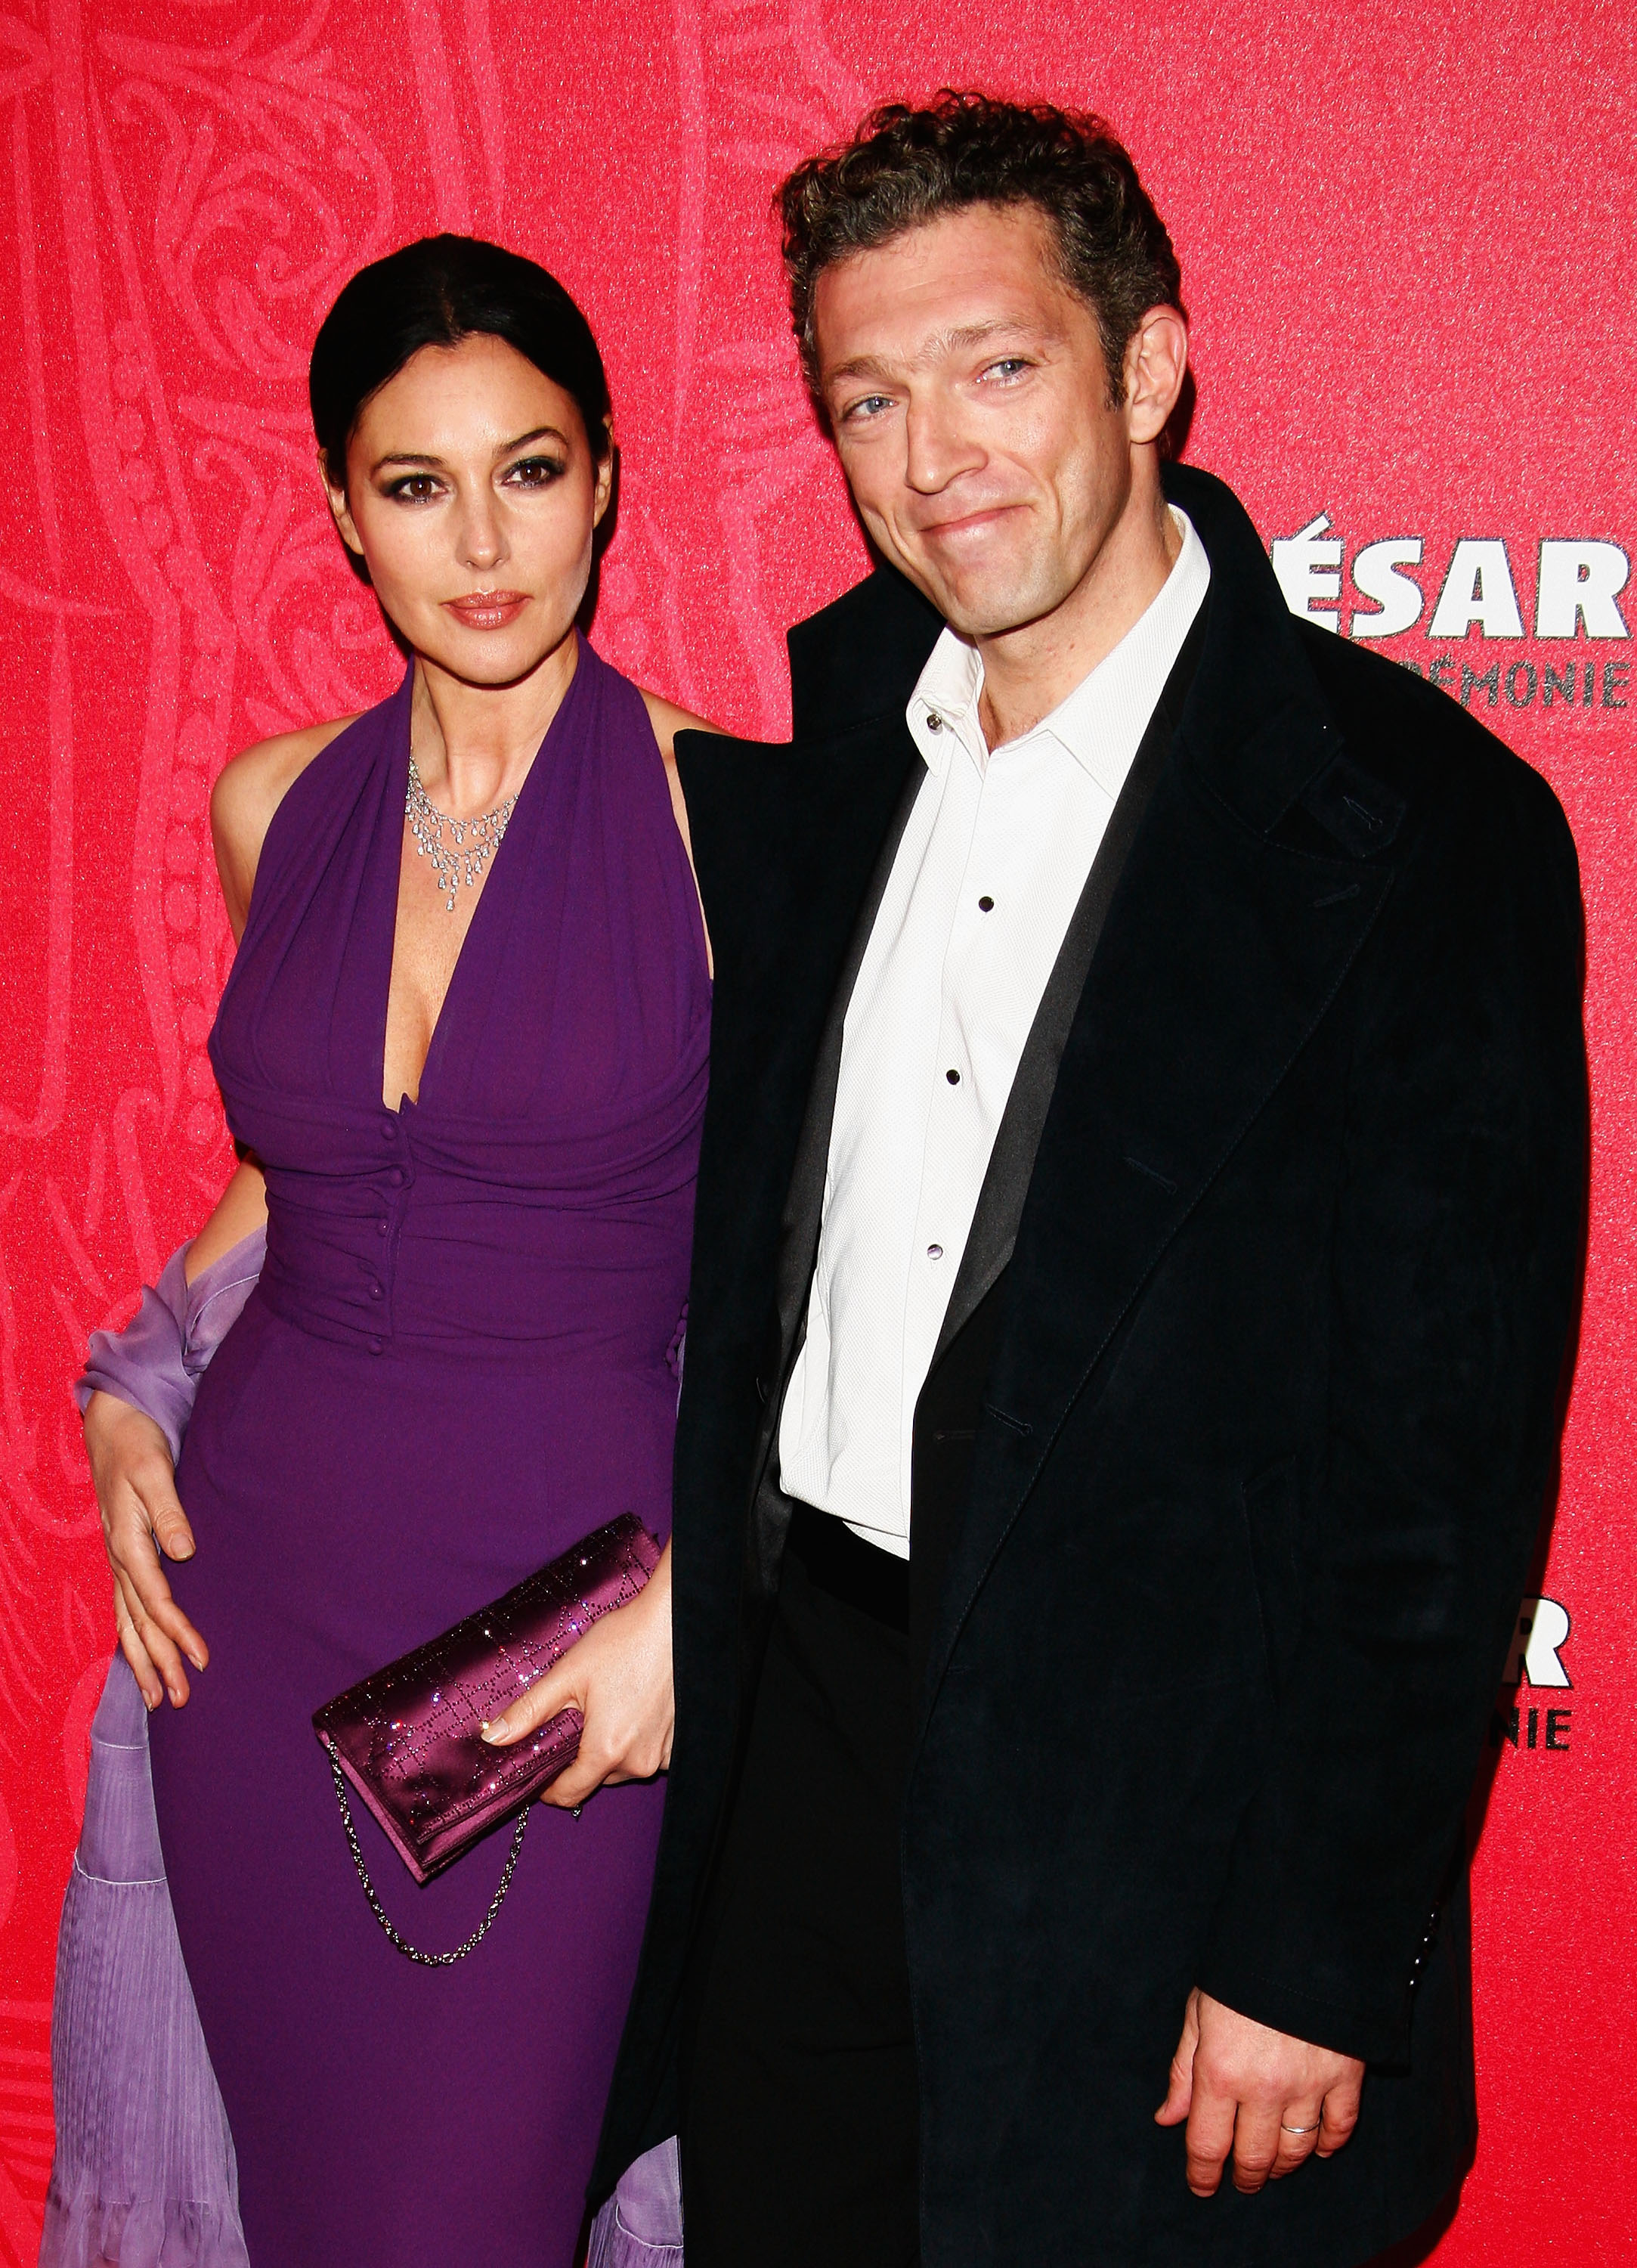 Monica Bellucci and Vincent Cassel pose as they arrive at the Cesar Film Awards 2009 at the Theatre du Chatelet on February 27, 2009, in Paris, France | Source: Getty Imags